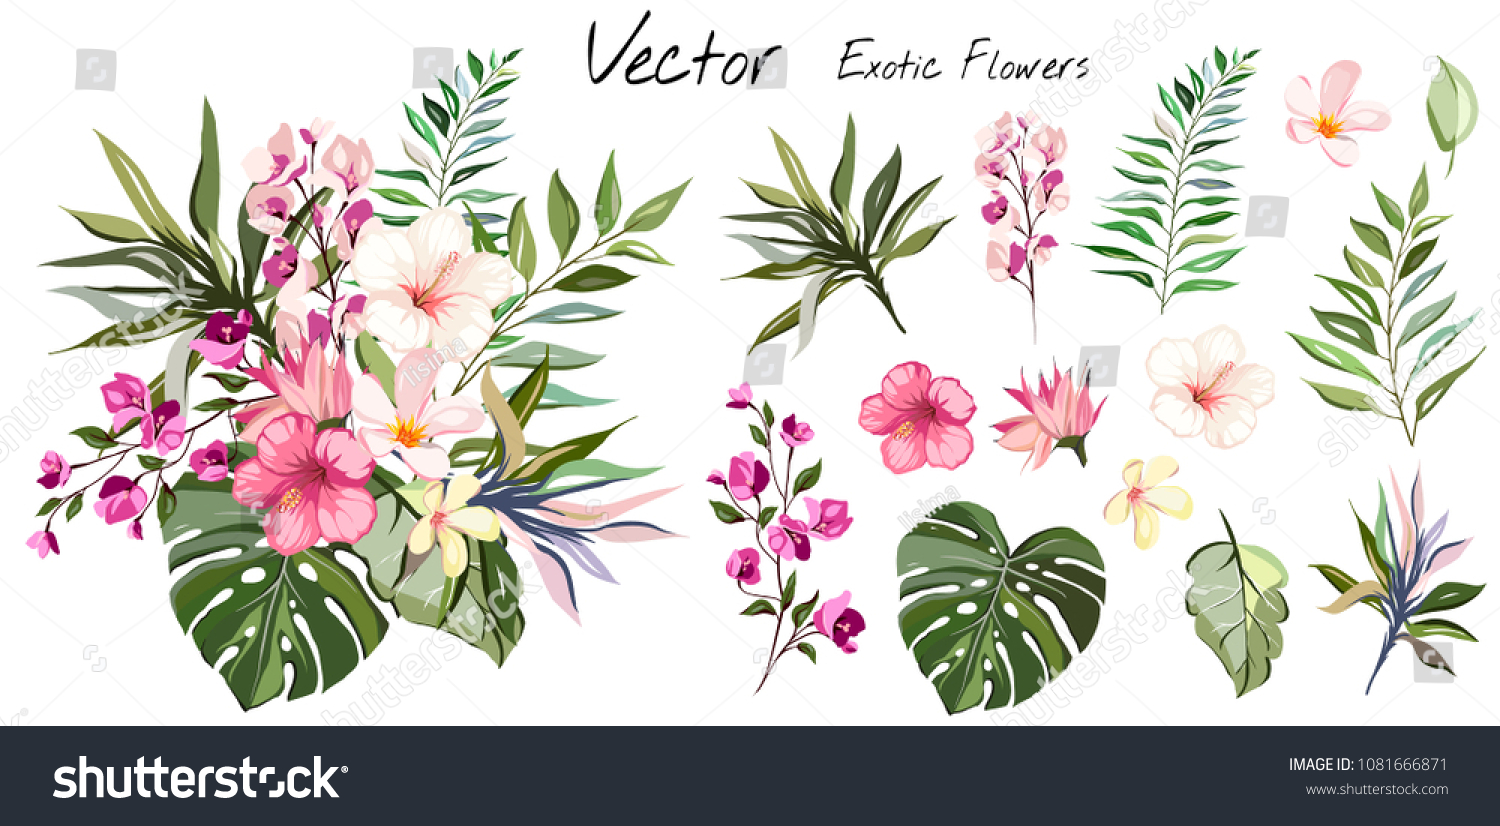 Tropical vector flowers. card with floral illustration. Bouquet of flowers with exotic Leaf isolated on white background. composition for invitation to party or holiday #1081666871